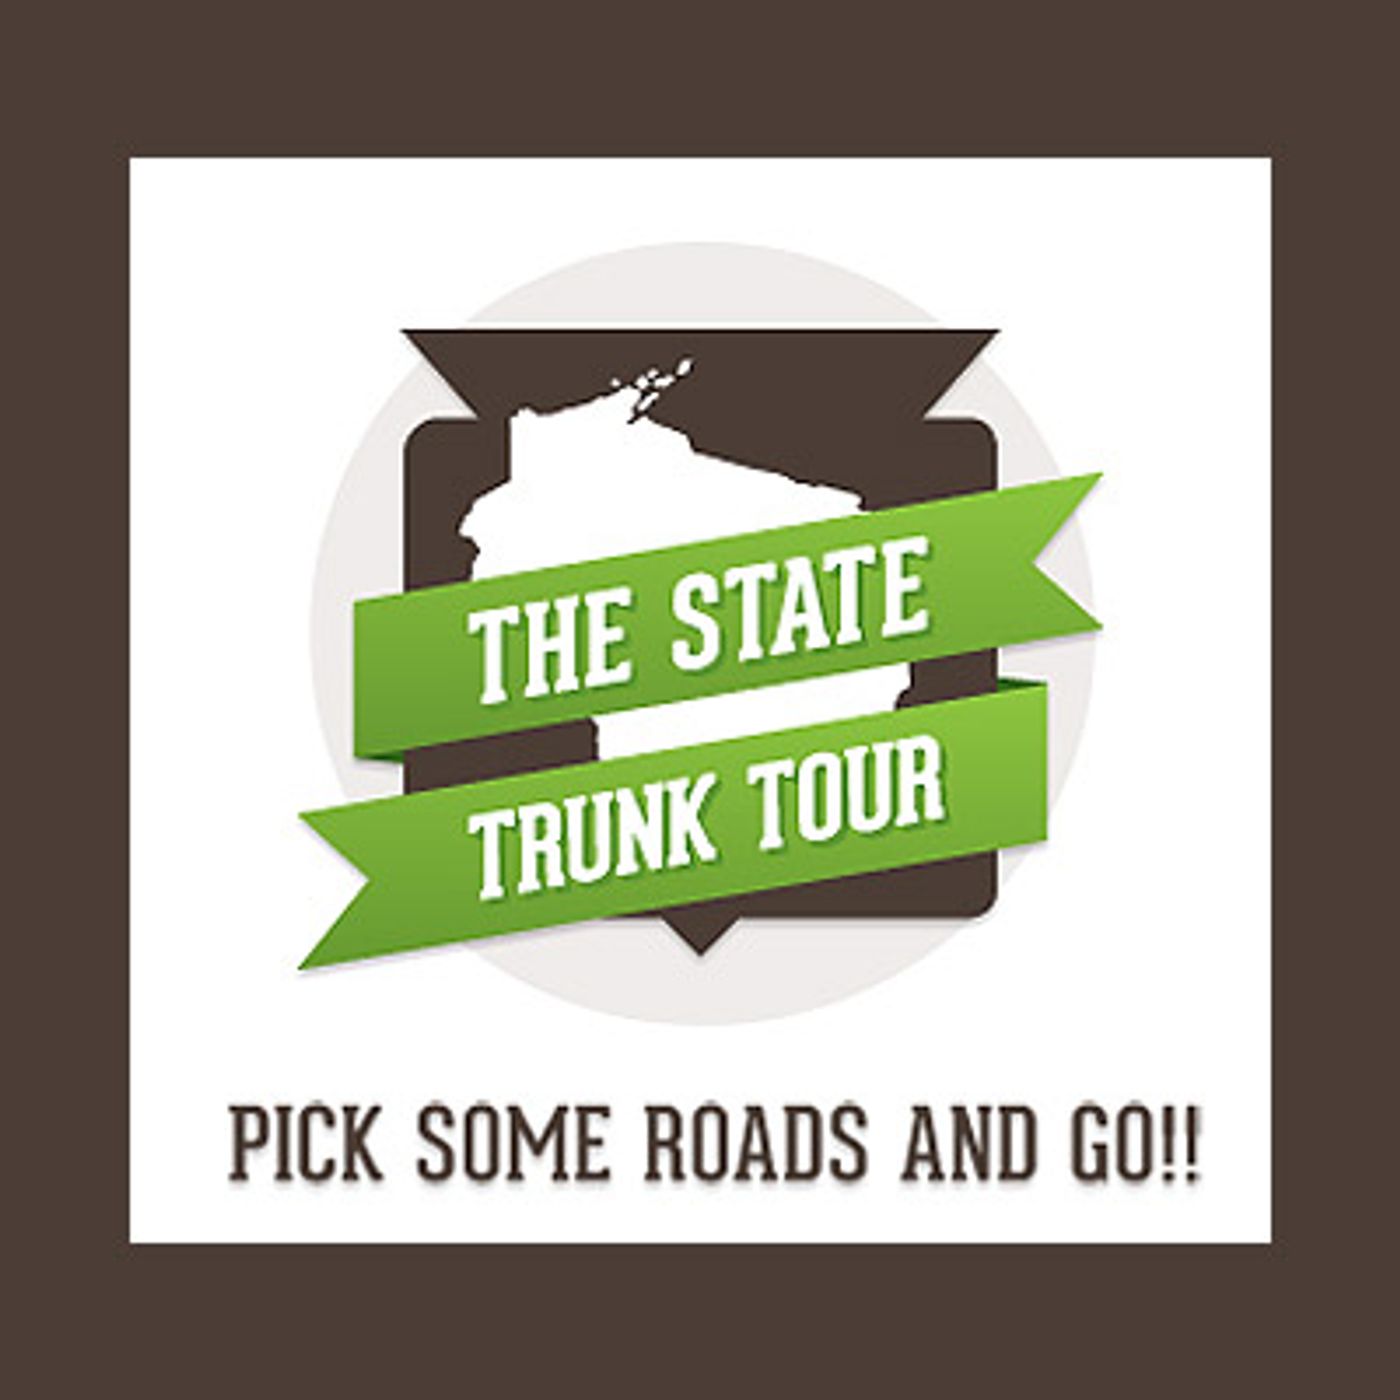 State Trunk Tour